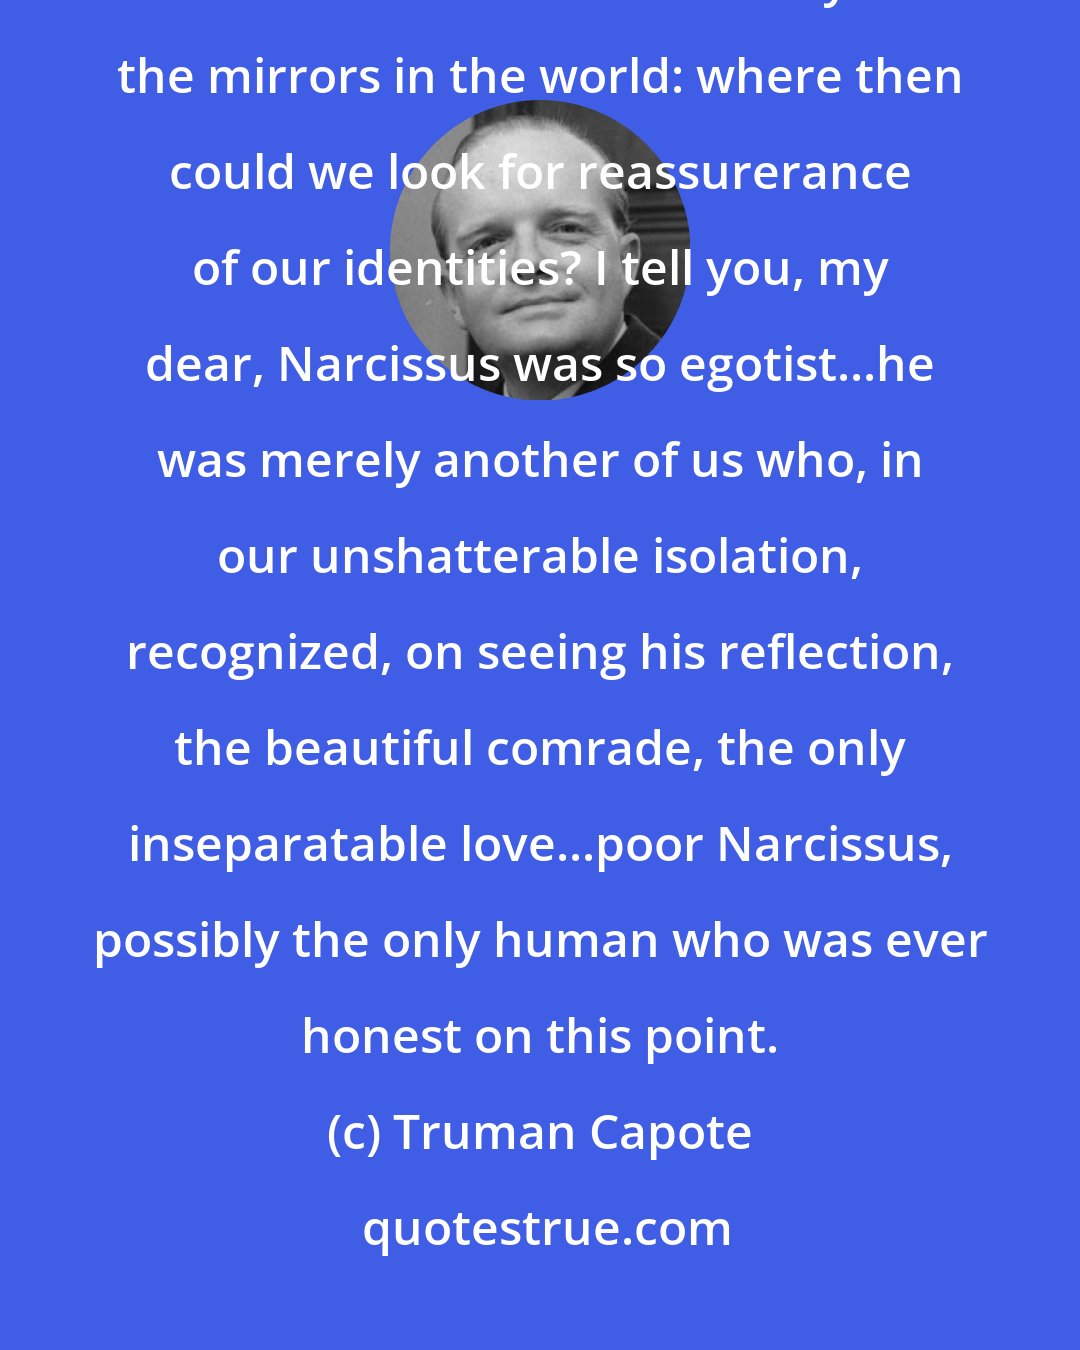 Truman Capote: They can romanticize us so, mirrors, and that is their secret: what a subtle torture it would be to destroy all the mirrors in the world: where then could we look for reassurerance of our identities? I tell you, my dear, Narcissus was so egotist...he was merely another of us who, in our unshatterable isolation, recognized, on seeing his reflection, the beautiful comrade, the only inseparatable love...poor Narcissus, possibly the only human who was ever honest on this point.